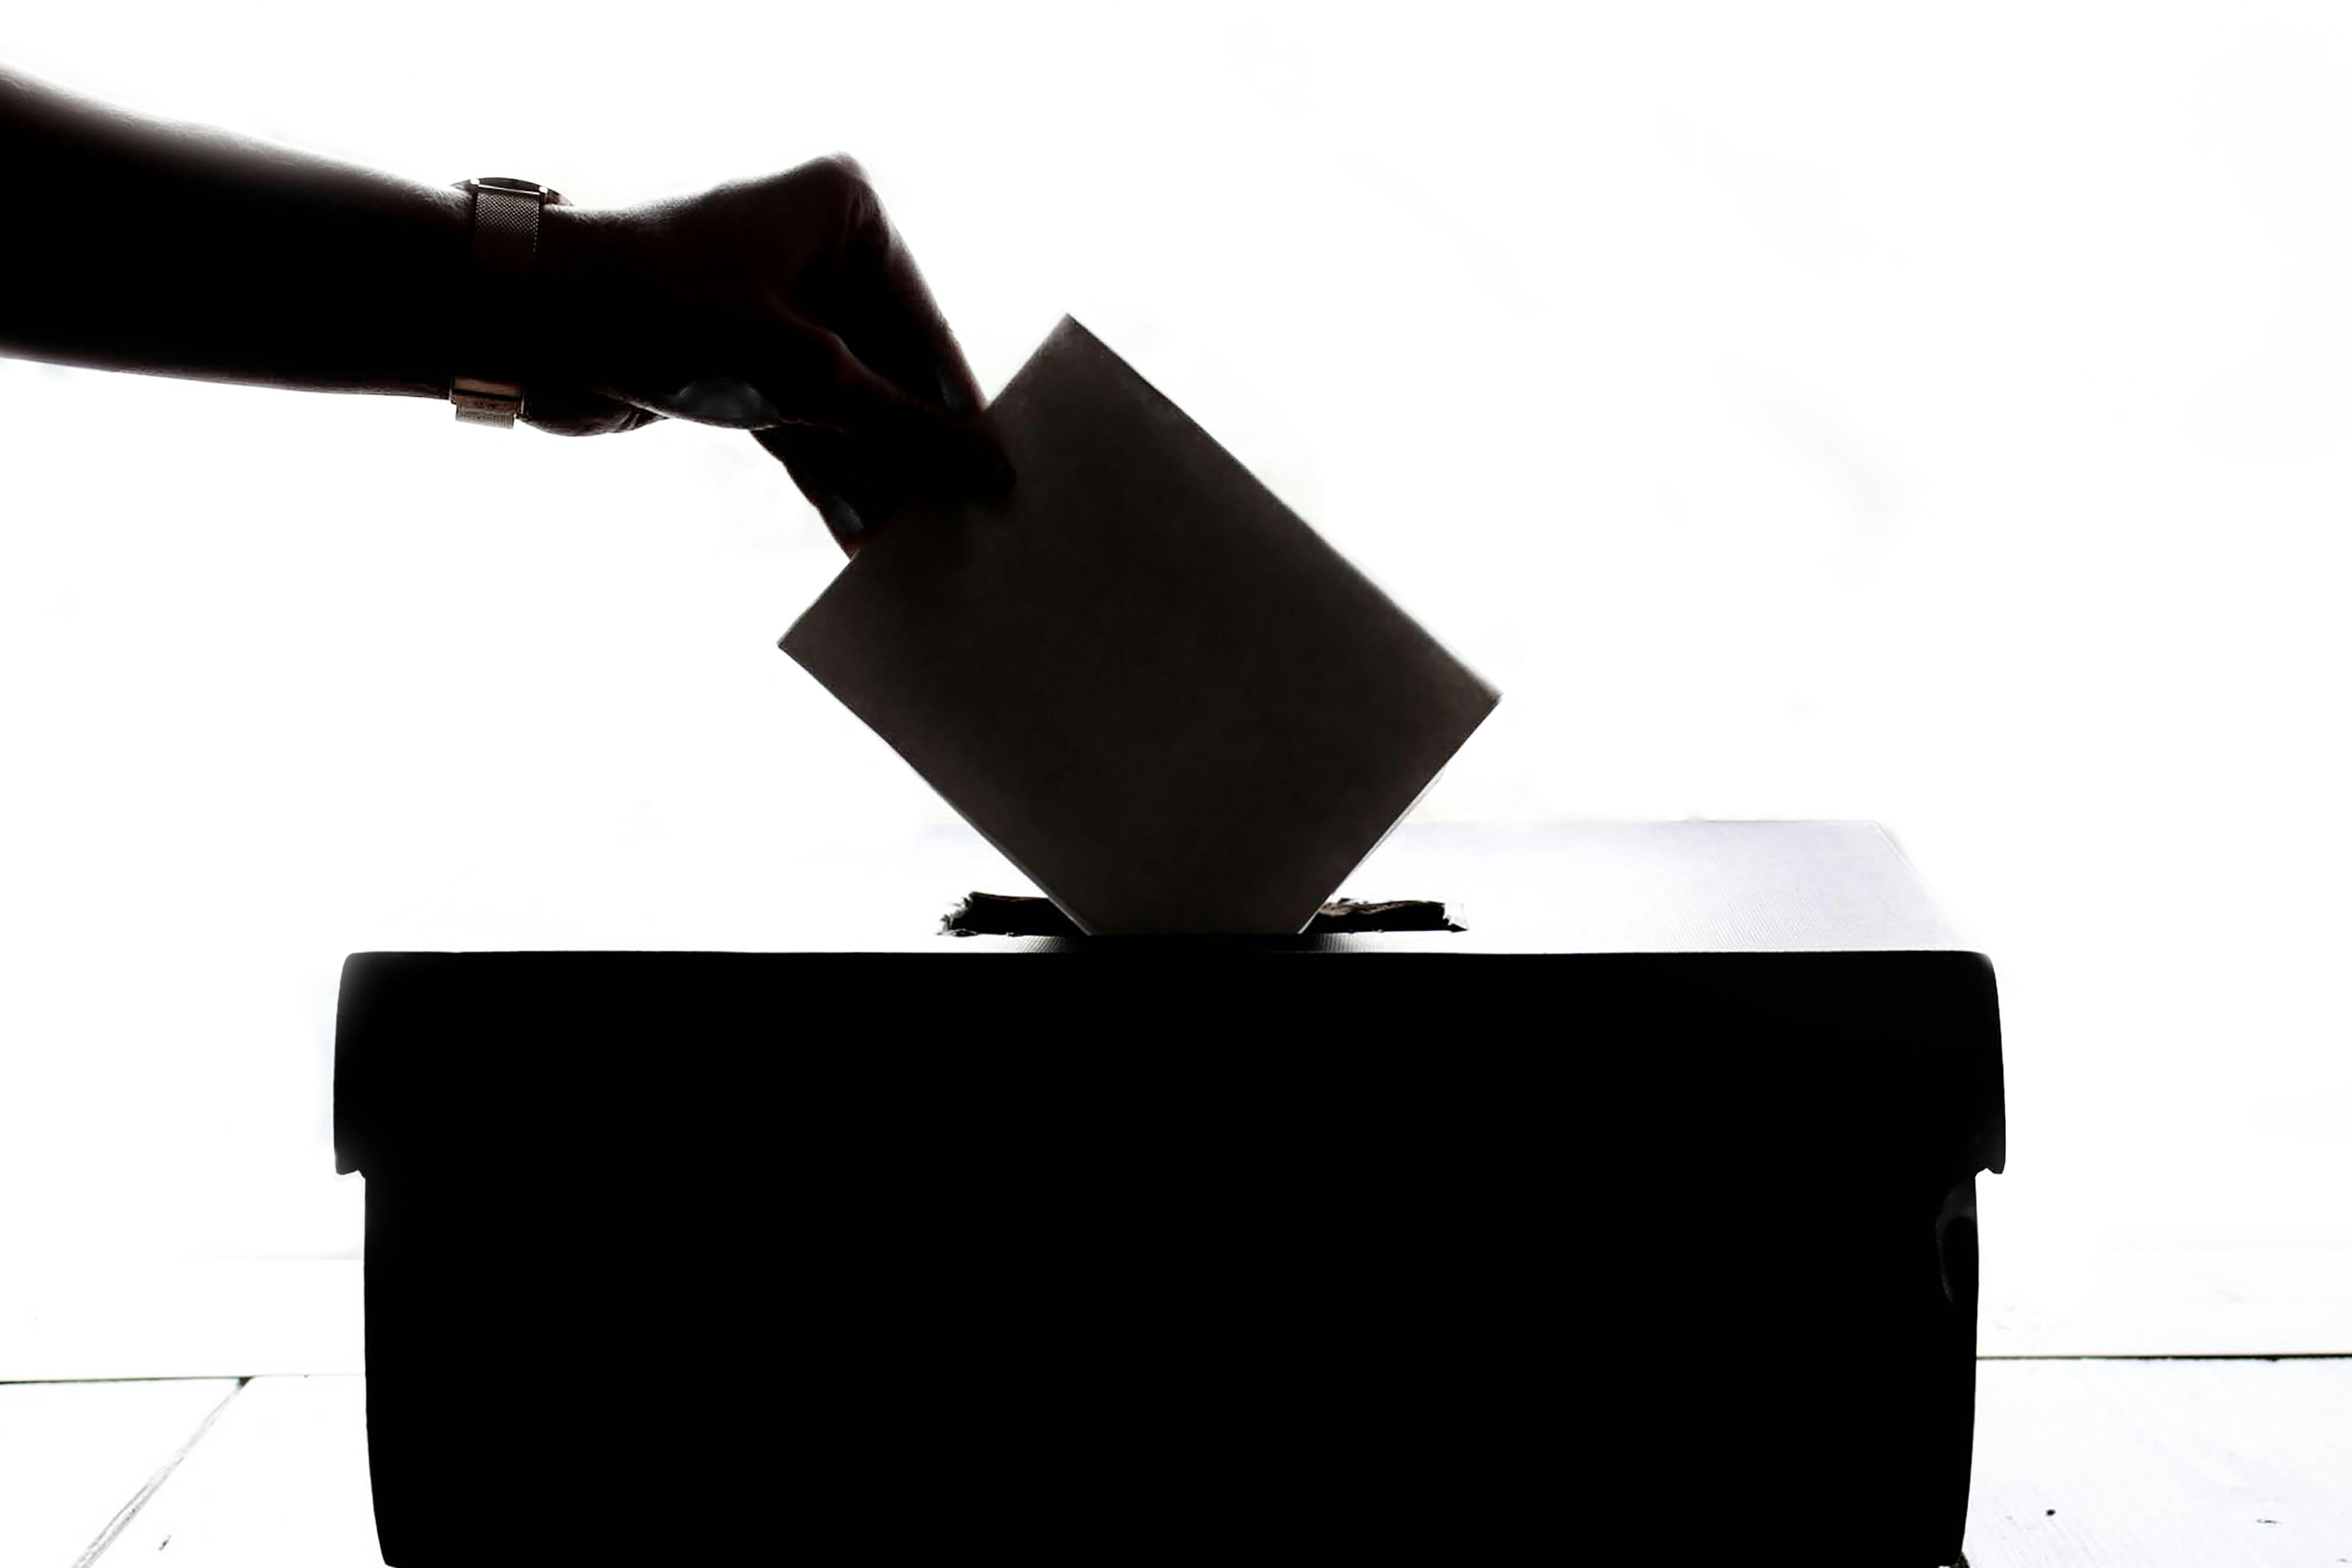 Person dropping a ballot in a box, 2018. Pexels.